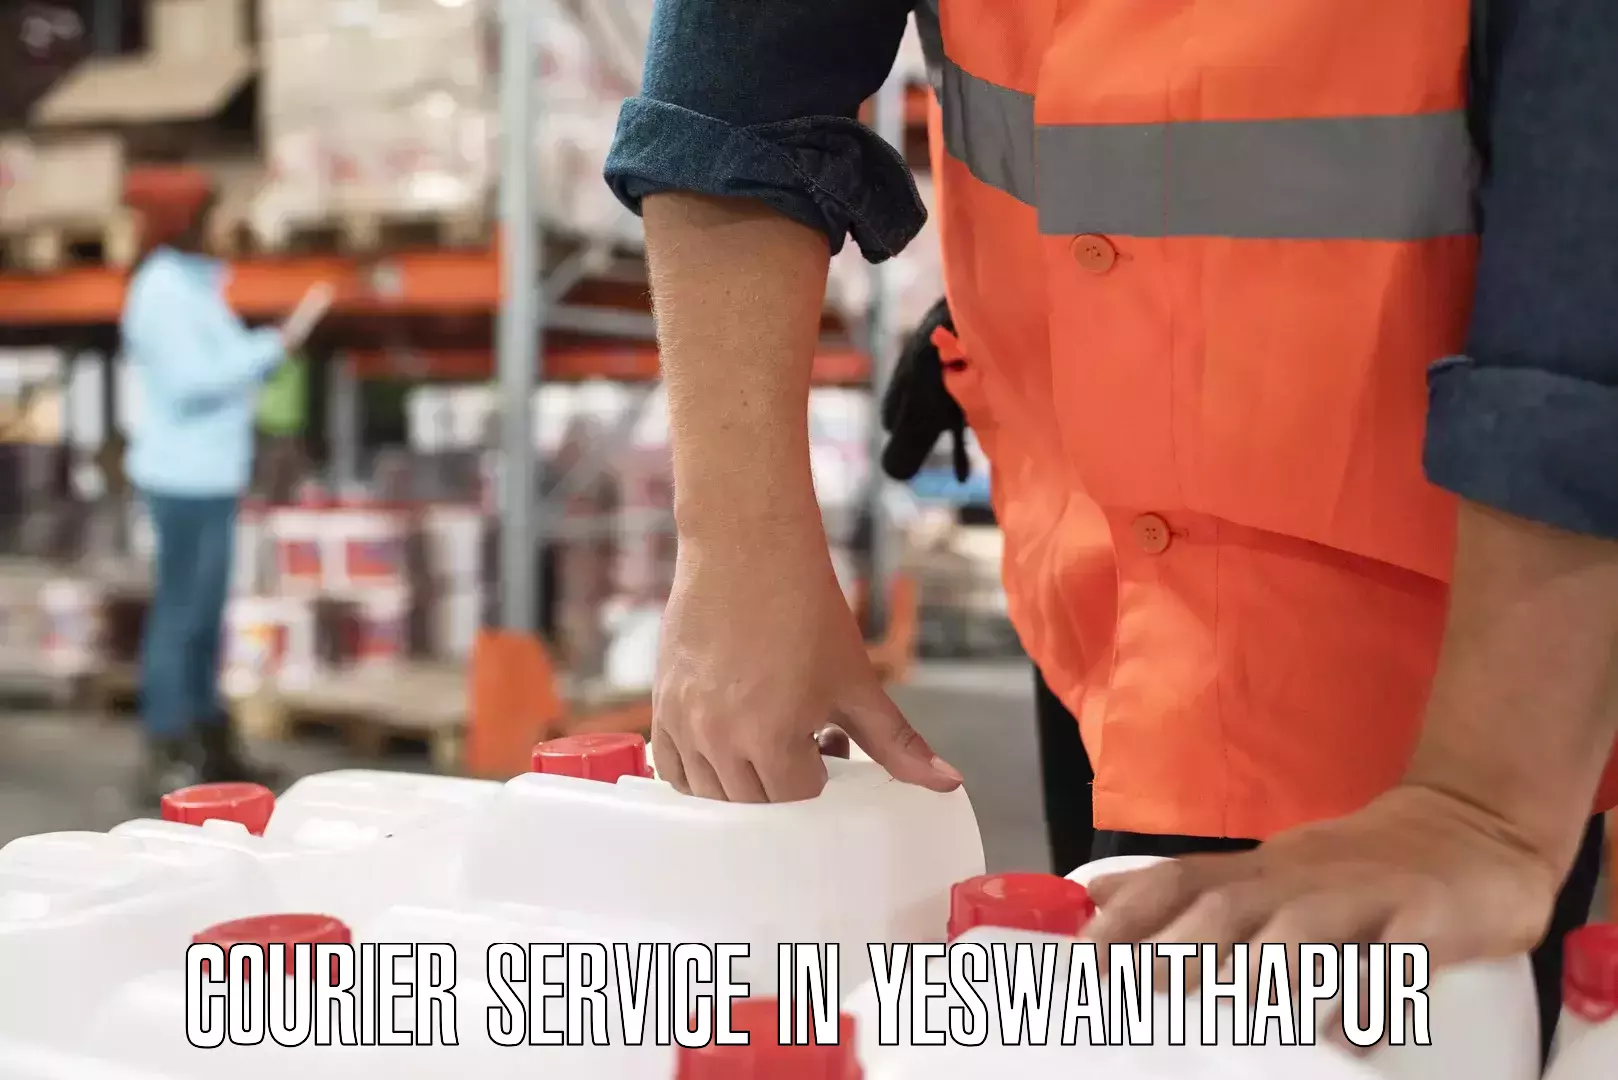 User-friendly delivery service in Yeswanthapur